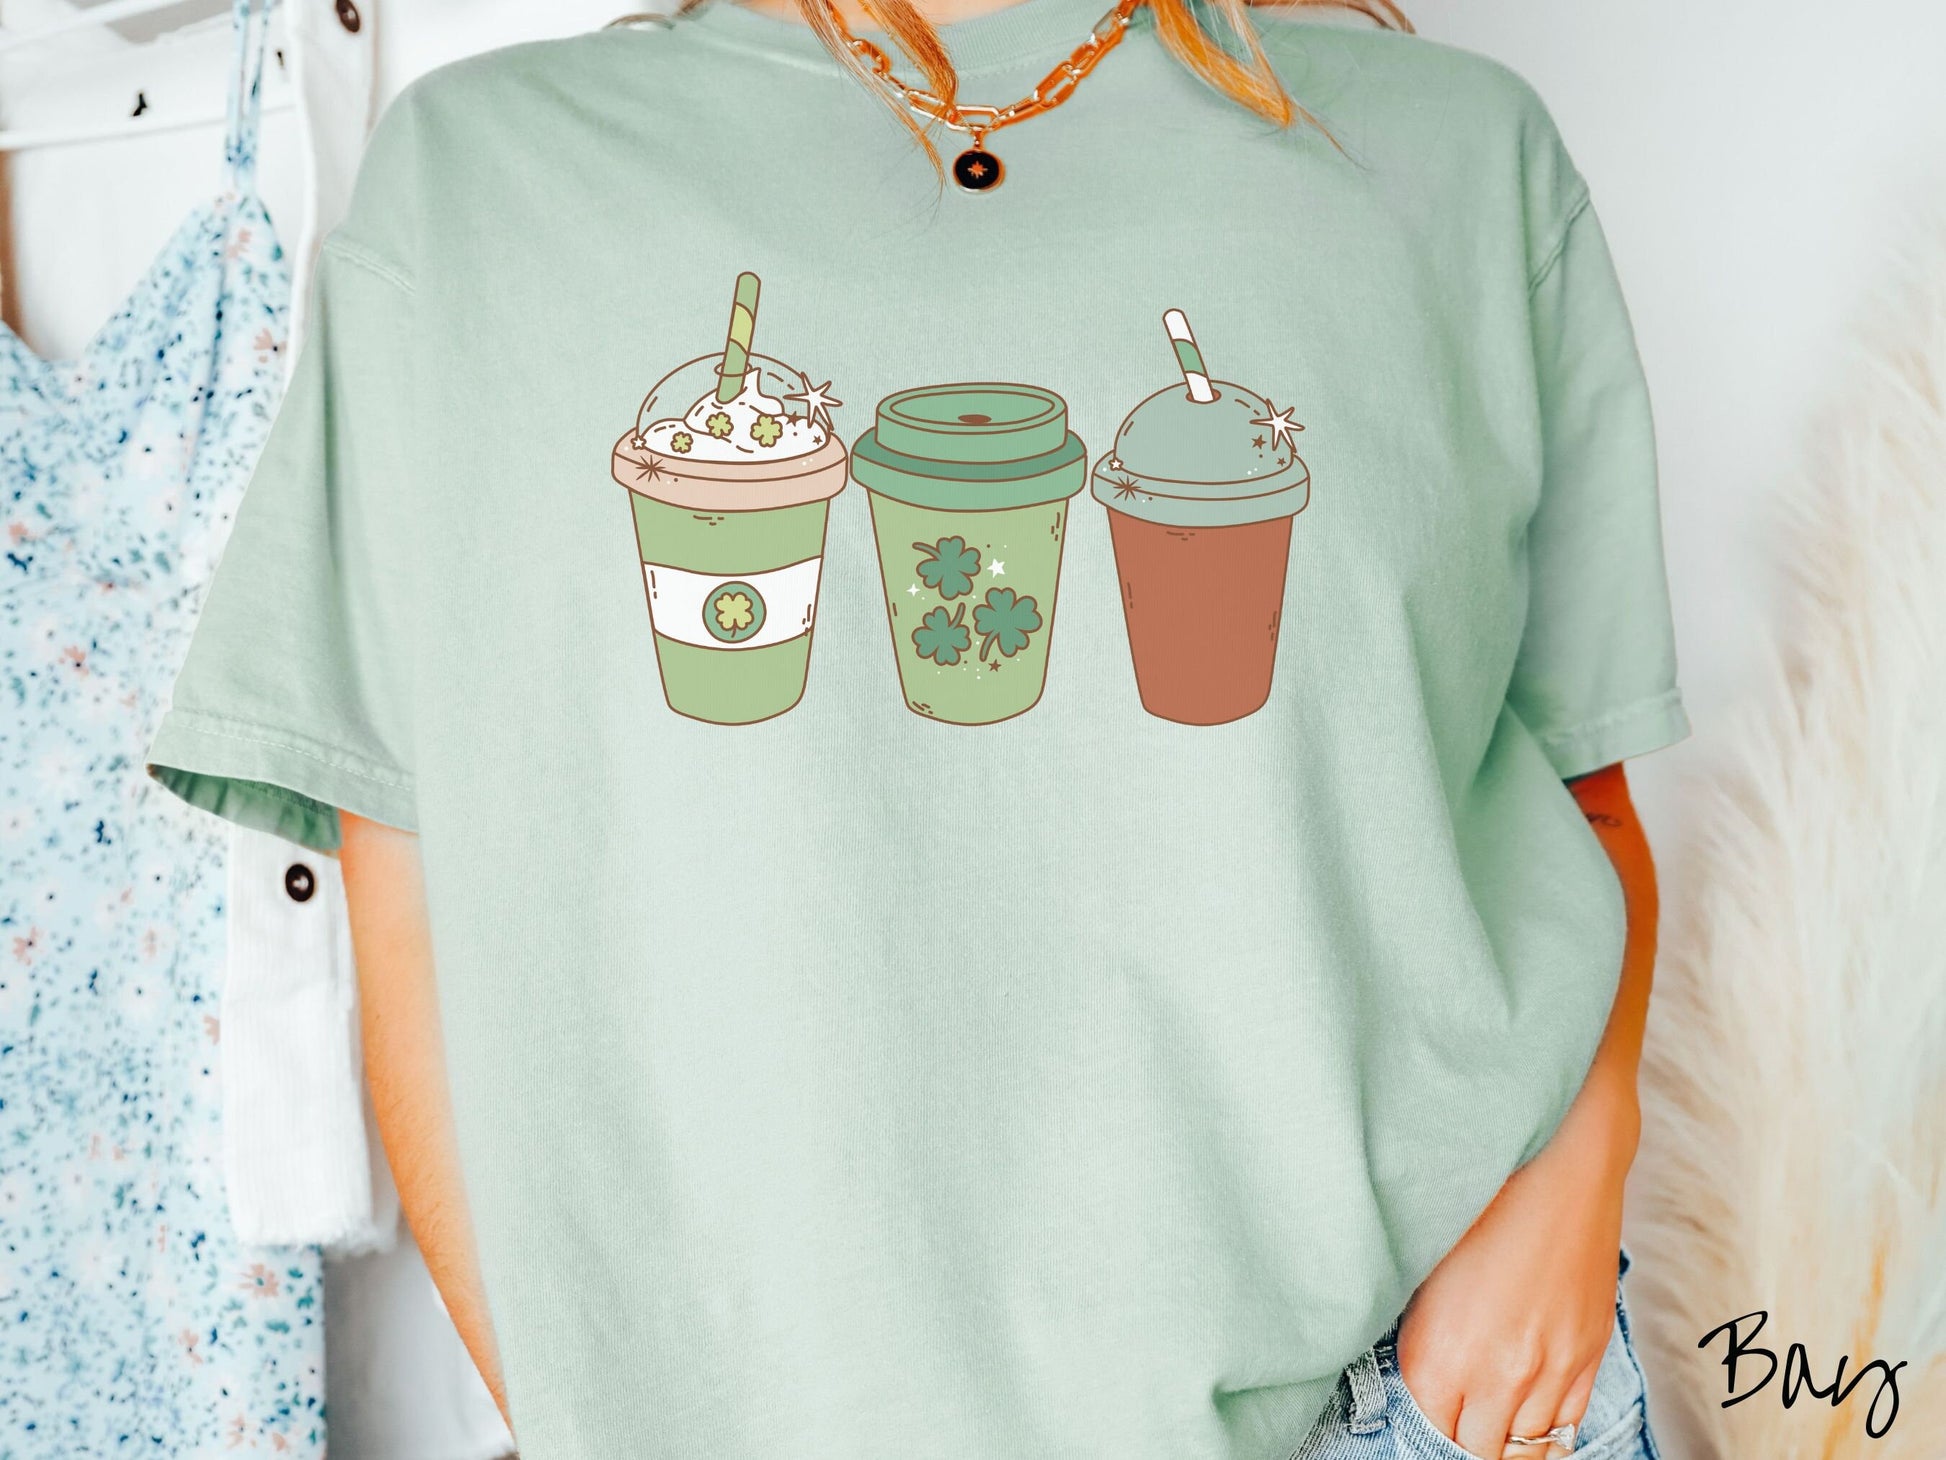 A woman wearing a vintage, bay colored shirt with three coffee cups, one is white and green with a clear lid showing whipped cream topping with green clover sprinkles, another green cup with green clovers, and the third is brown with a green lid.